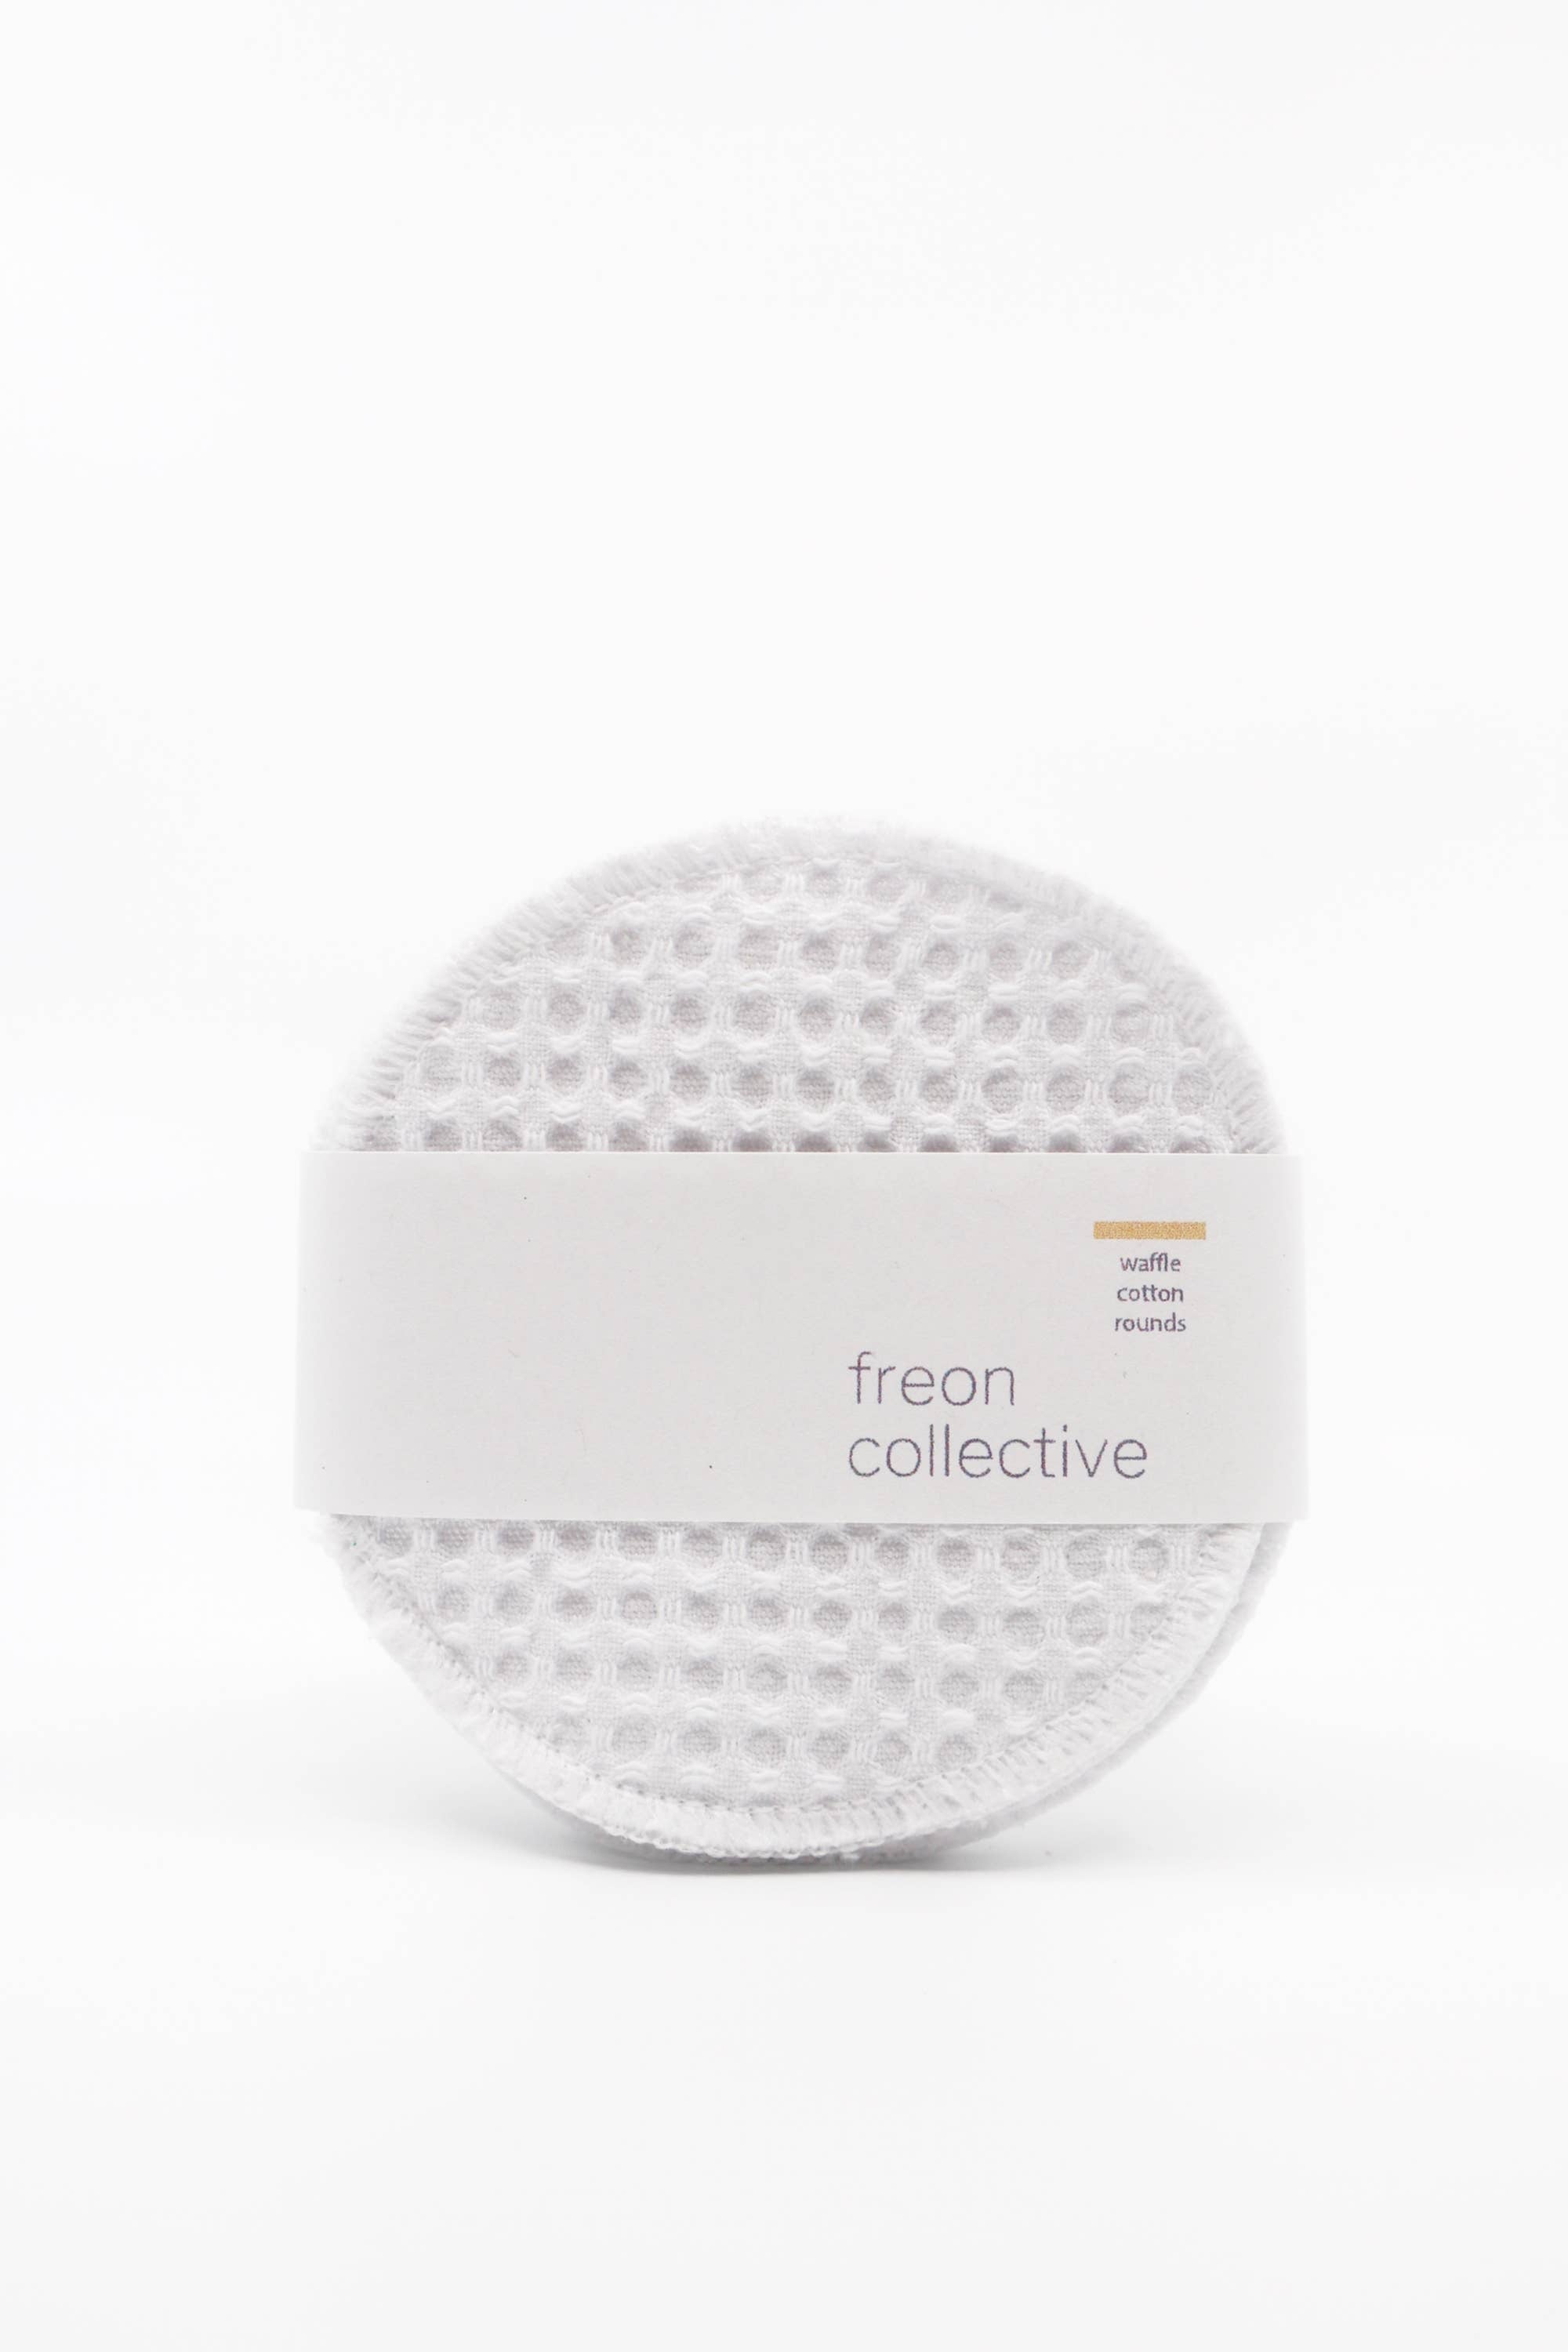 Freon Collective - Waffle Cotton Rounds